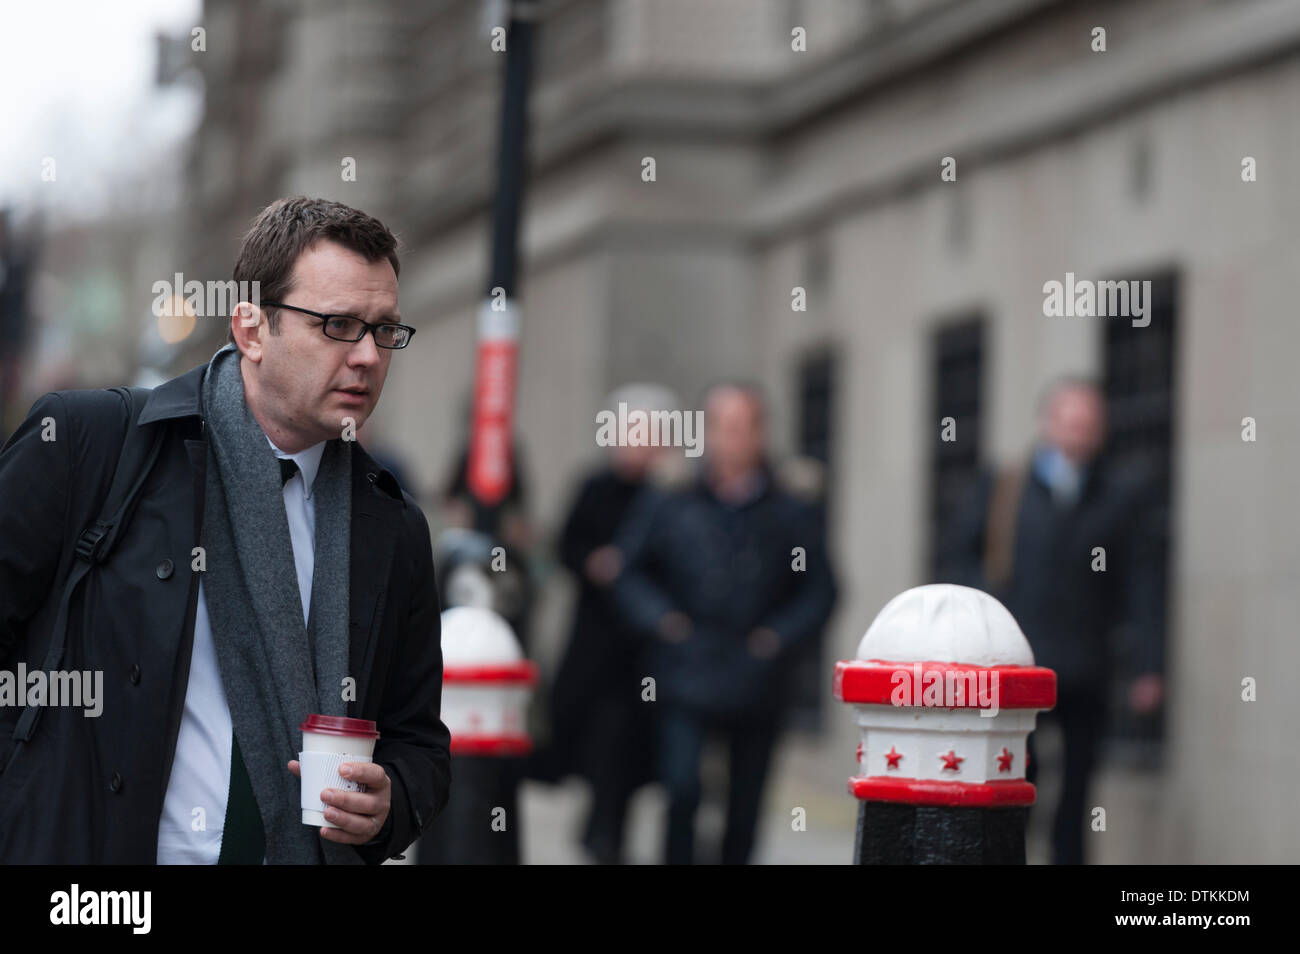 London, UK . 20th Feb, 2014. The phone-hacking trial continues at the Old Bailey in London with former News of the World executives entering their second day of their defence against allegations of illegally intercepting voicemail messages on mobile phones amongst other related charges. Pictured: Andy Coulson (left). Credit:  Lee Thomas/Alamy Live News Stock Photo